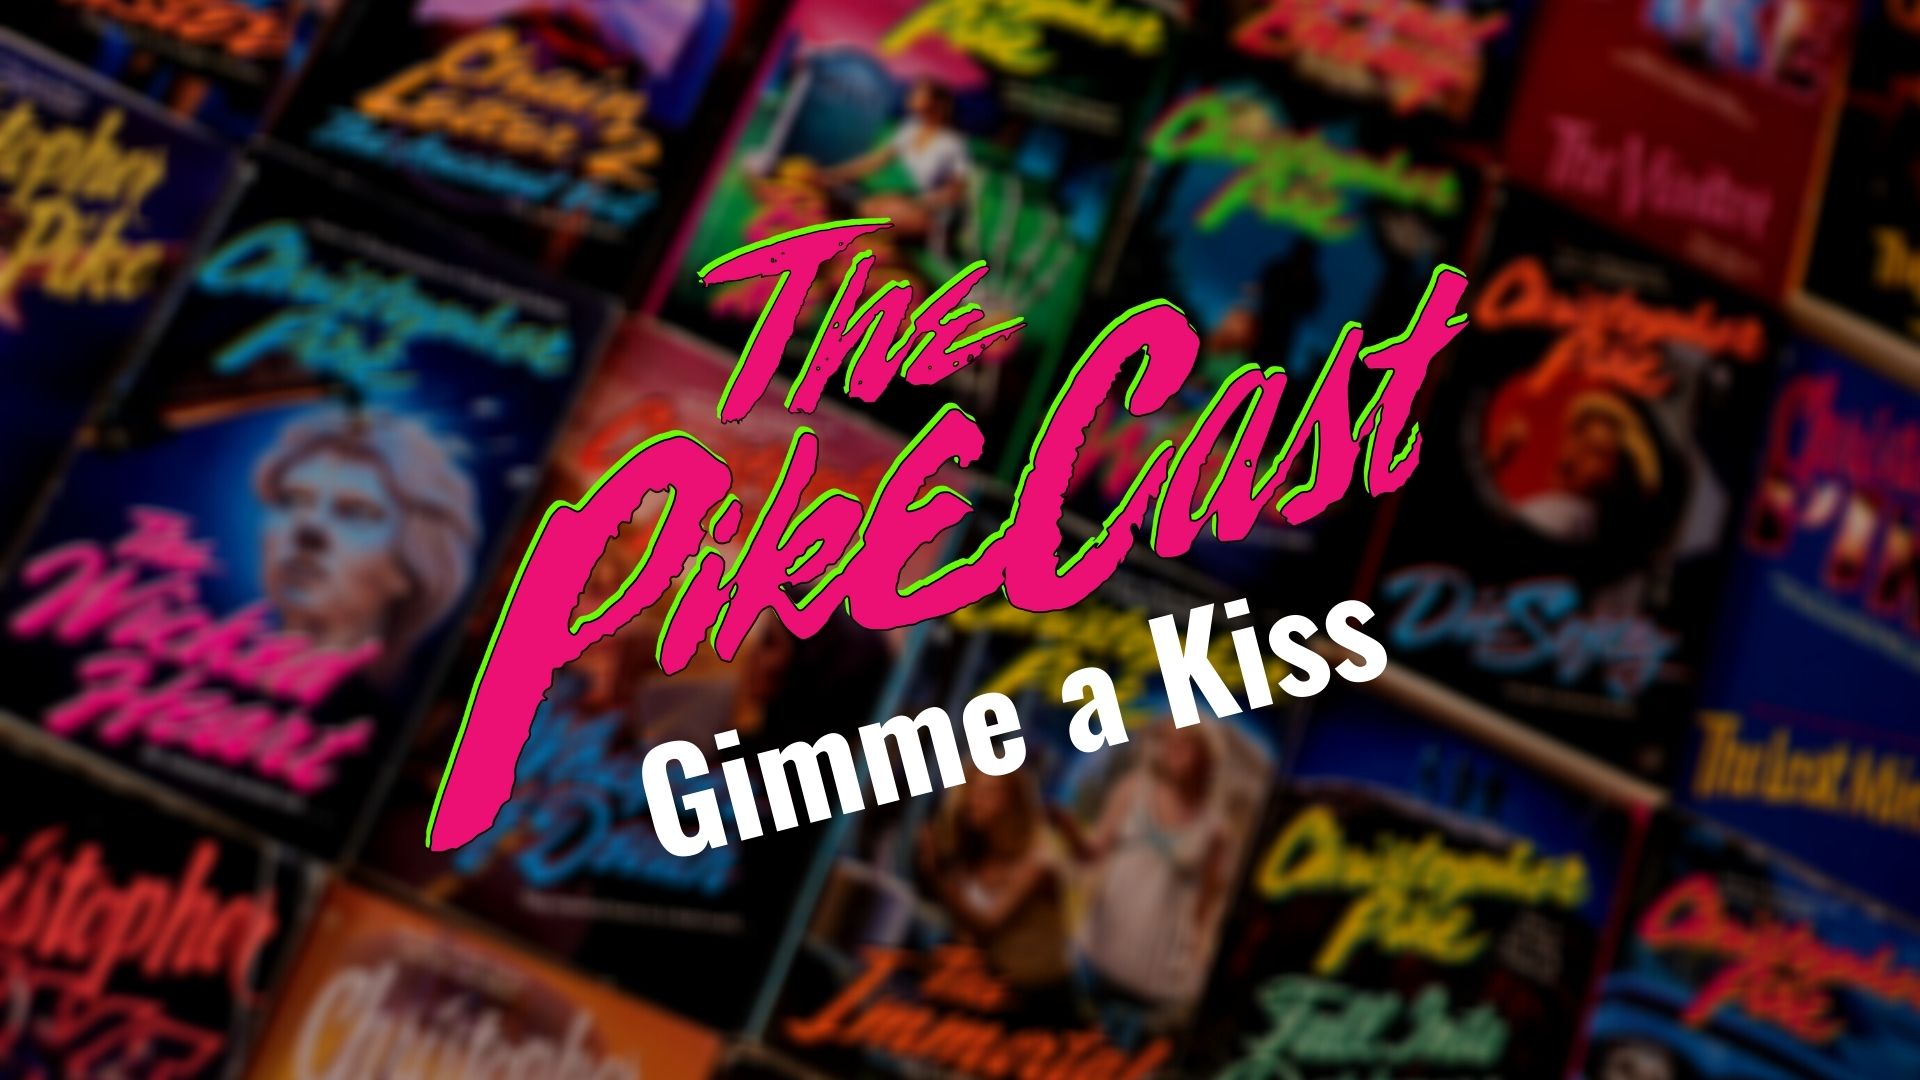 gimme a kiss by christopher pike